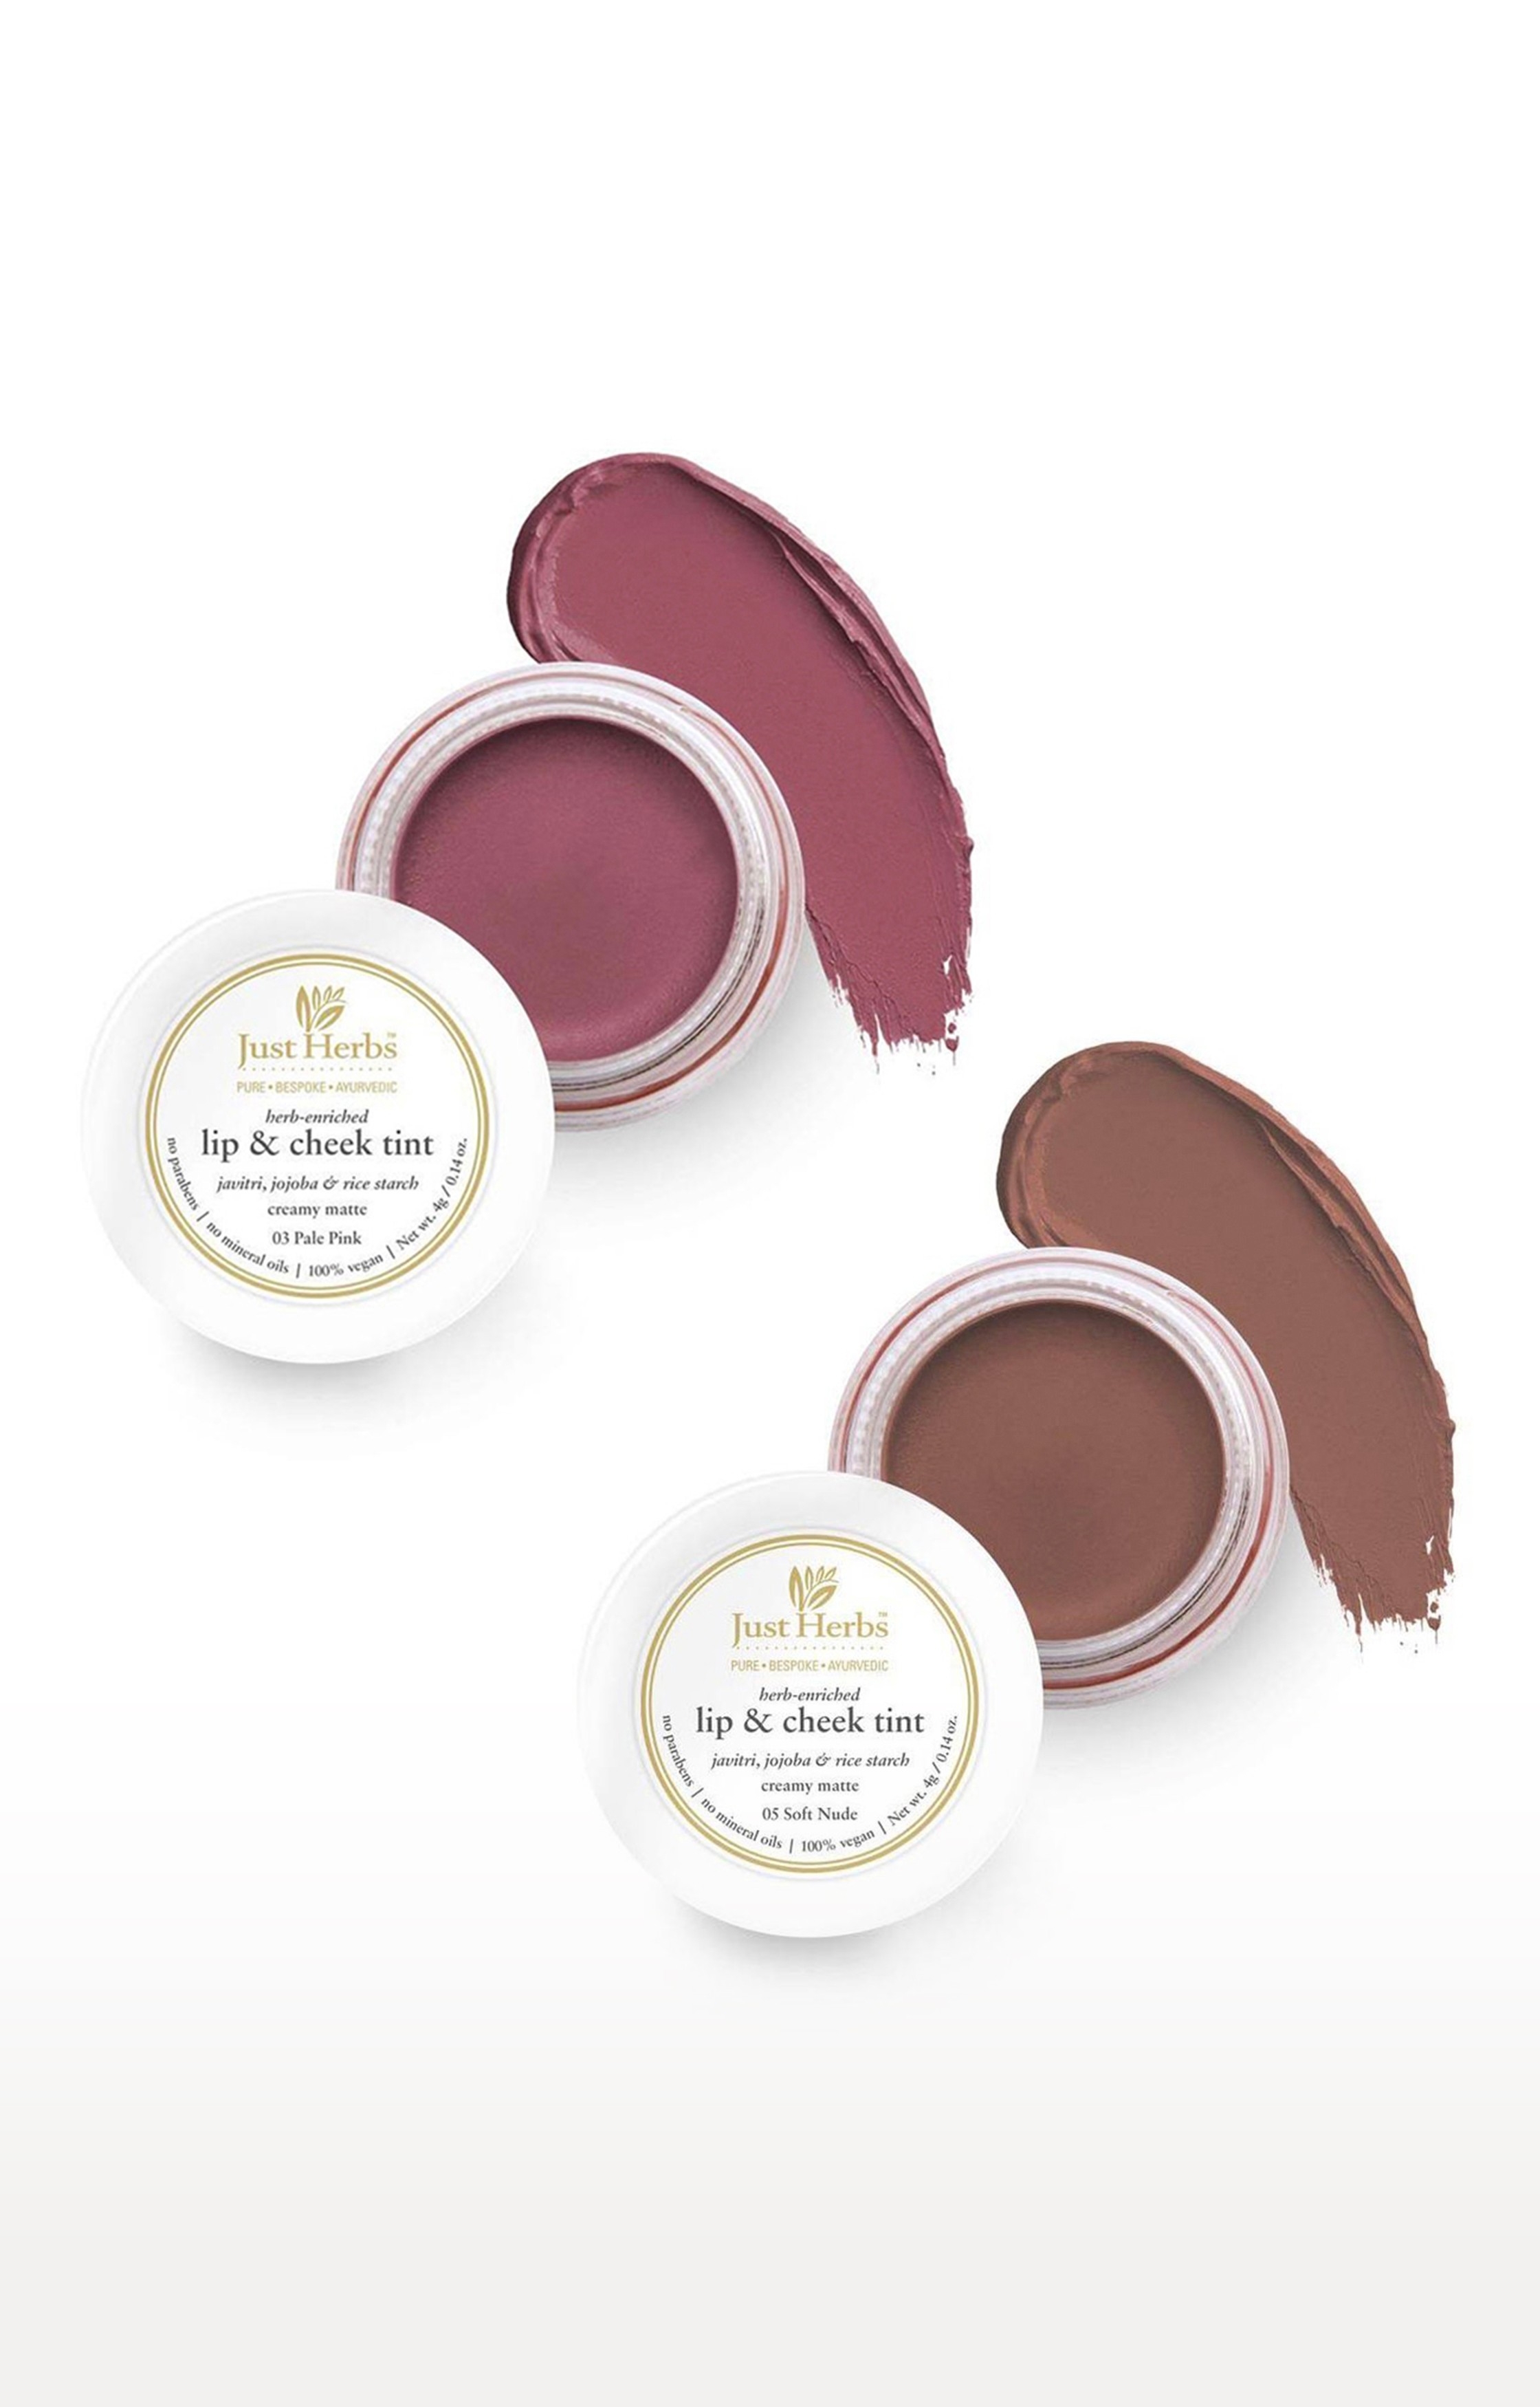 Just Herbs | Just Herbs Vegan Lip and Cheek Tint ( Pack of 2): Natural Blush - Pale Pink and Soft Nude